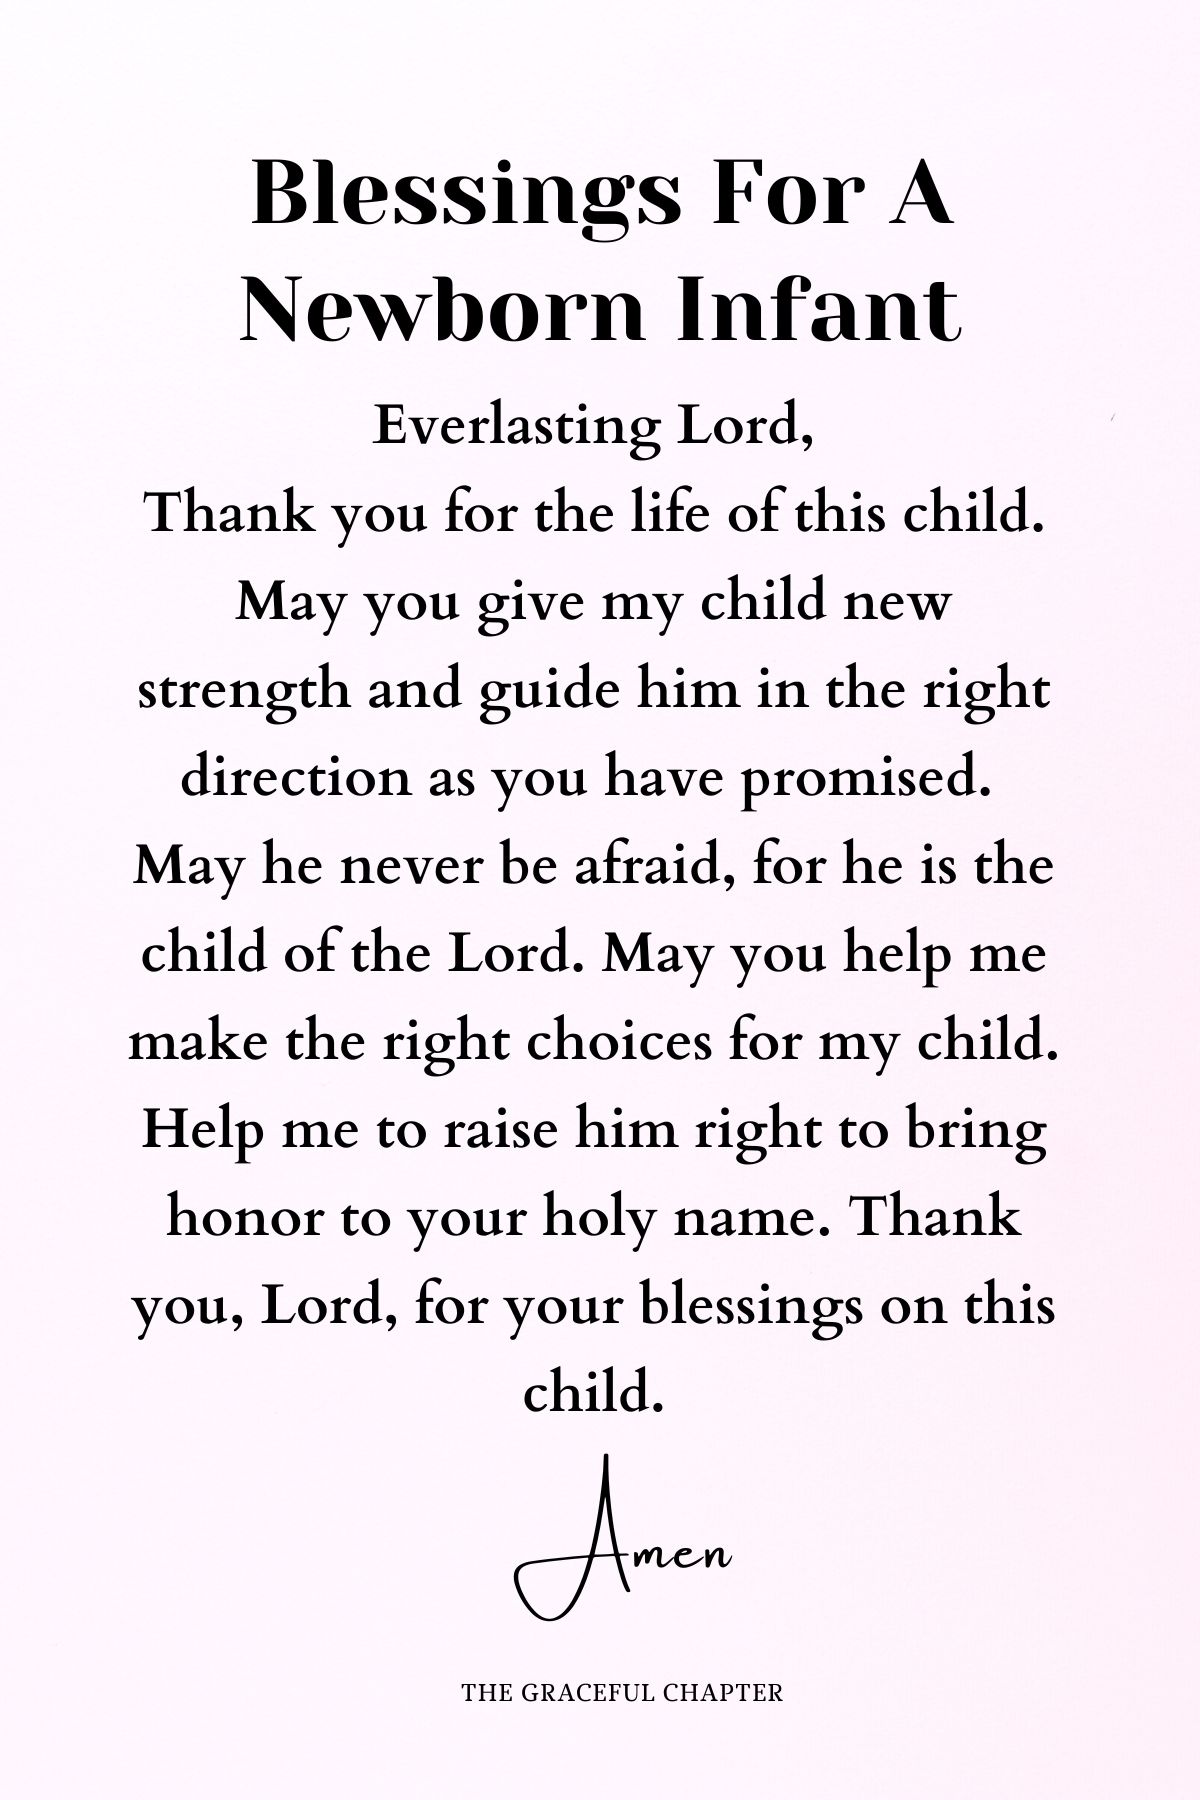 Blessings for a newborn infant